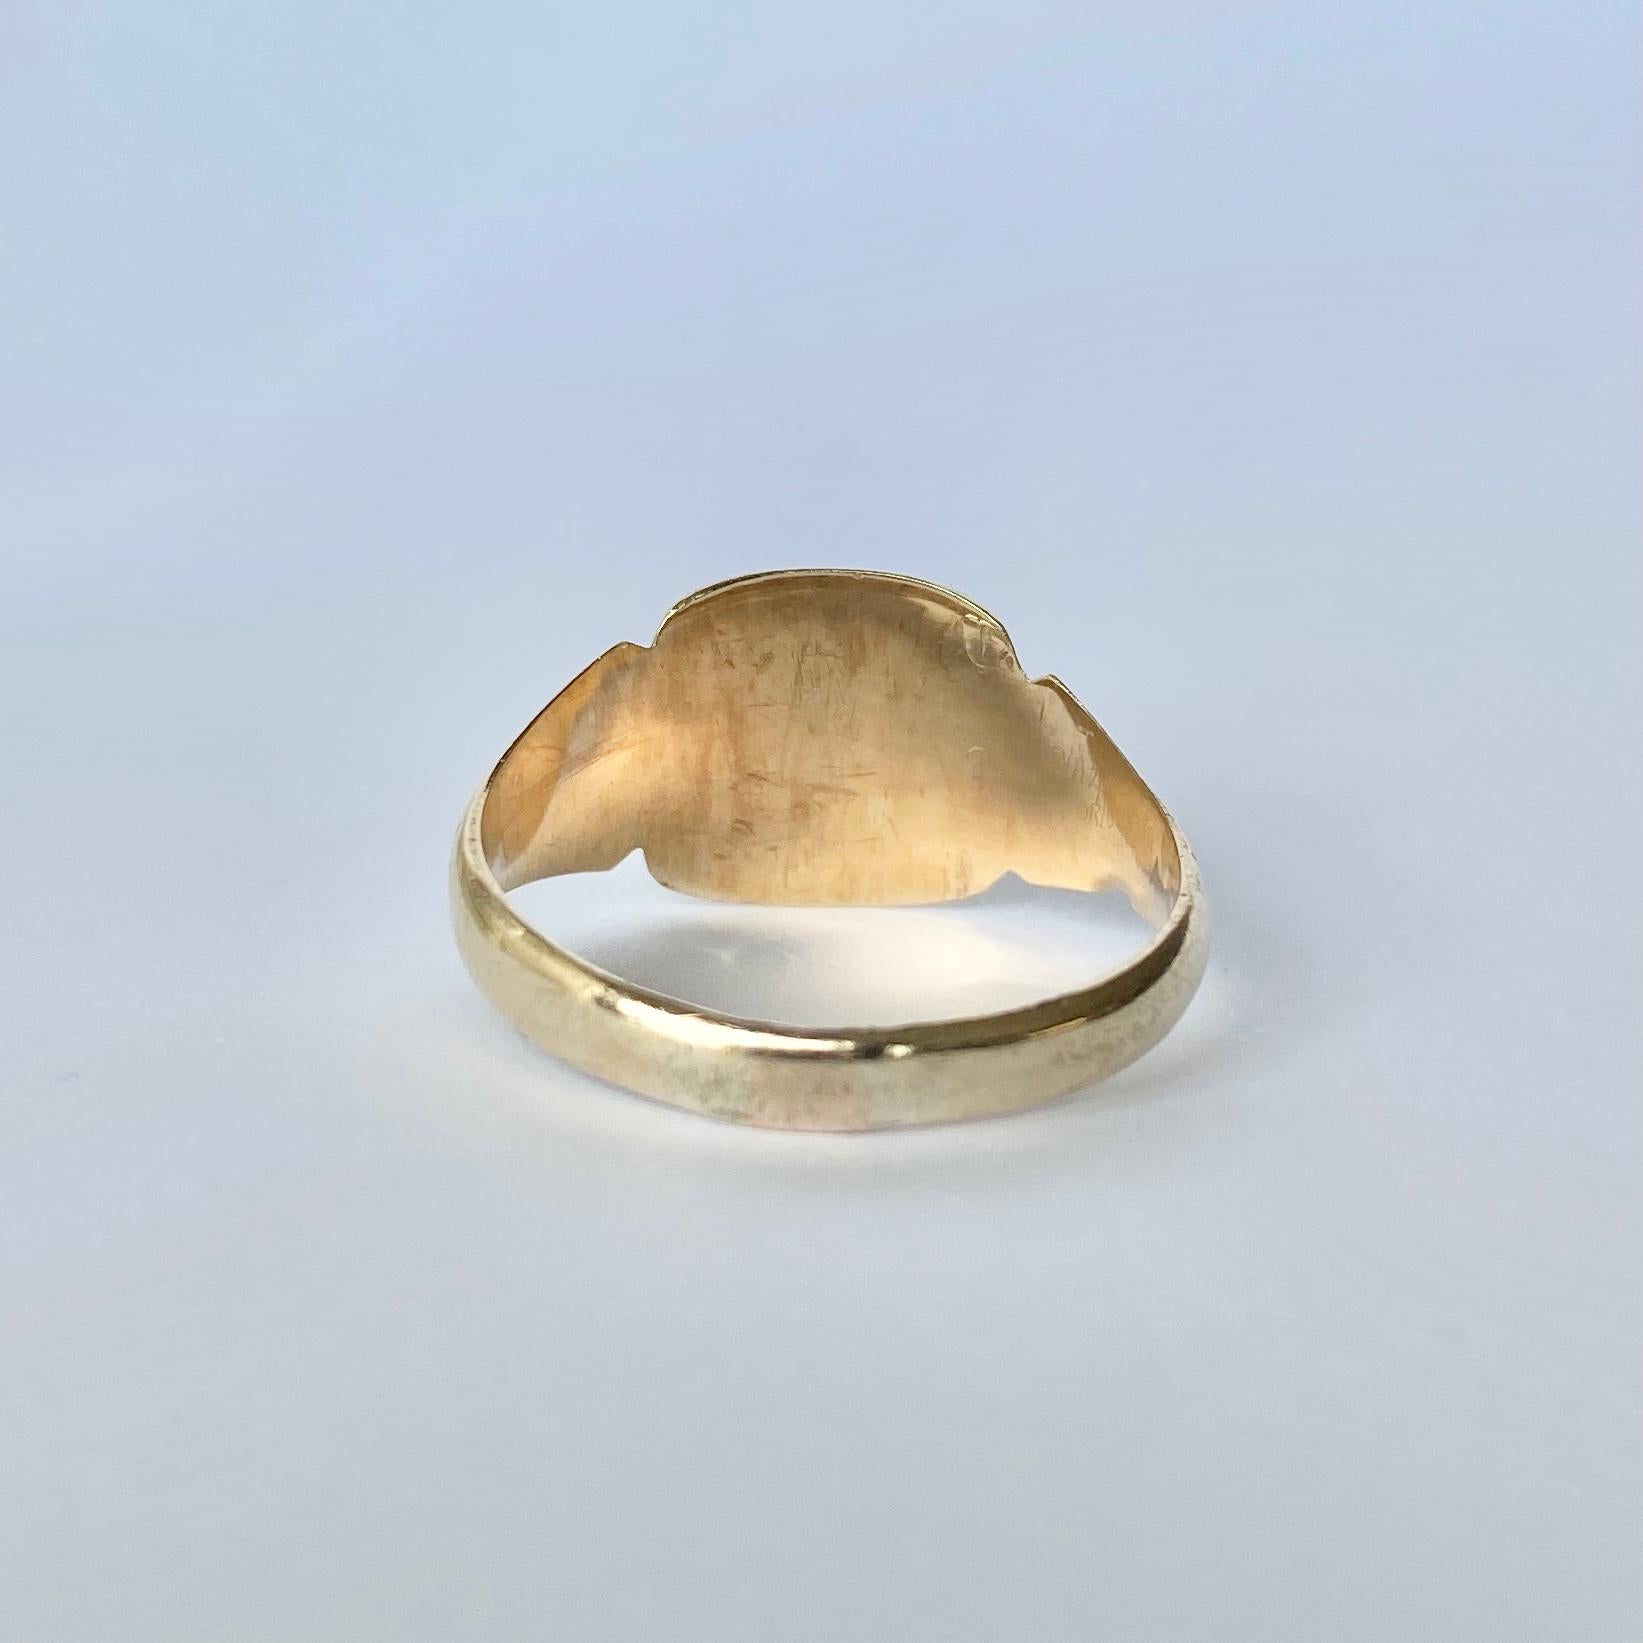 This sweet signet is modelled in 9ct gold and has a face with the initials 'ALC' engraved into it. Fully hallmarked Birmingham 1957.

Ring Size: W or 11
Face Dimensions: 13x12mm 

Weight: 3.3g